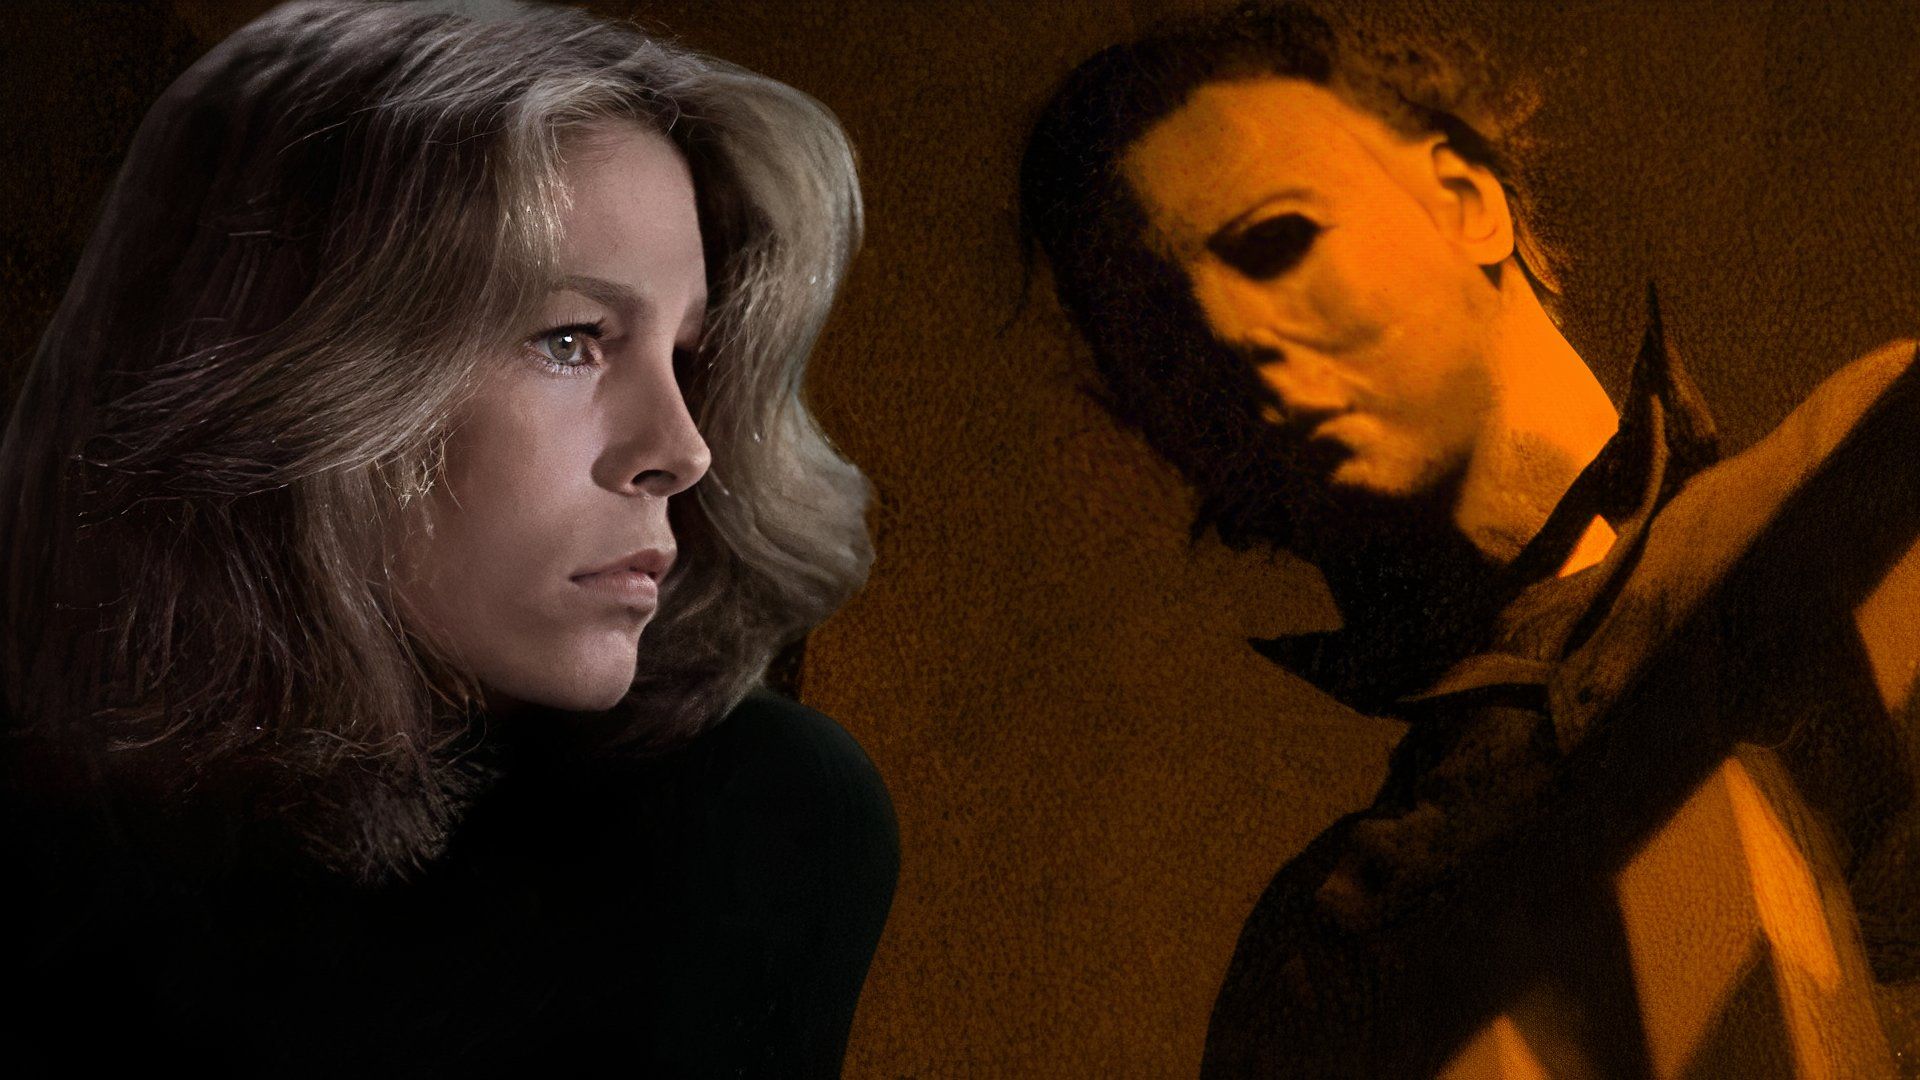 An edited image of Michael Myers wearing his iconic white mask with Jamie Lee Curtis as Laurie in Halloween